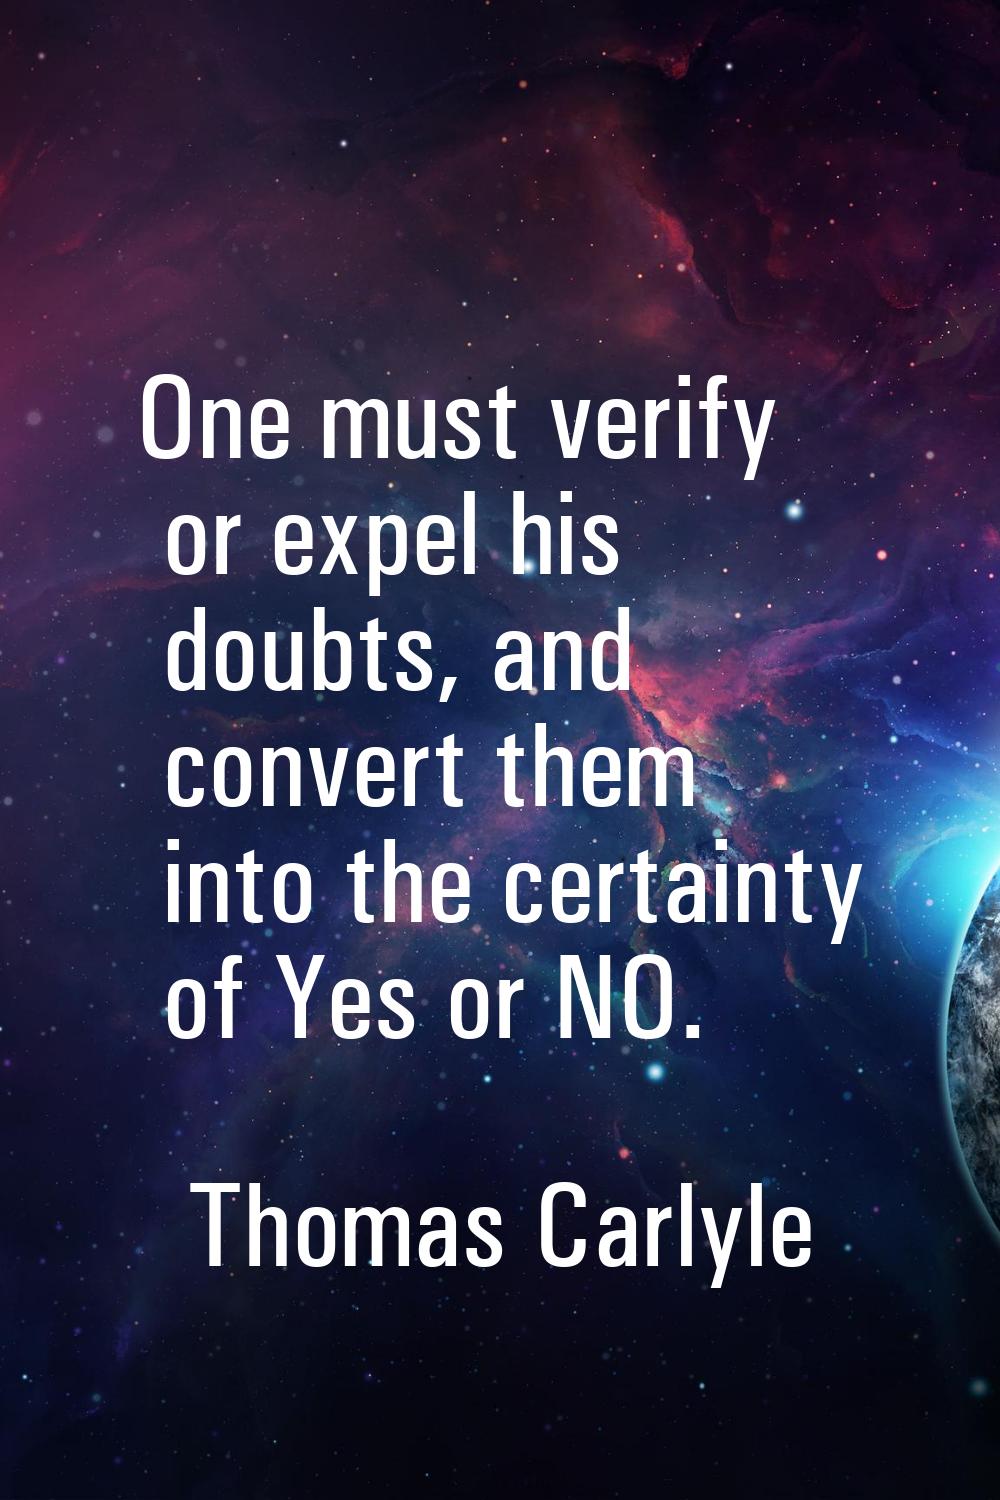 One must verify or expel his doubts, and convert them into the certainty of Yes or NO.